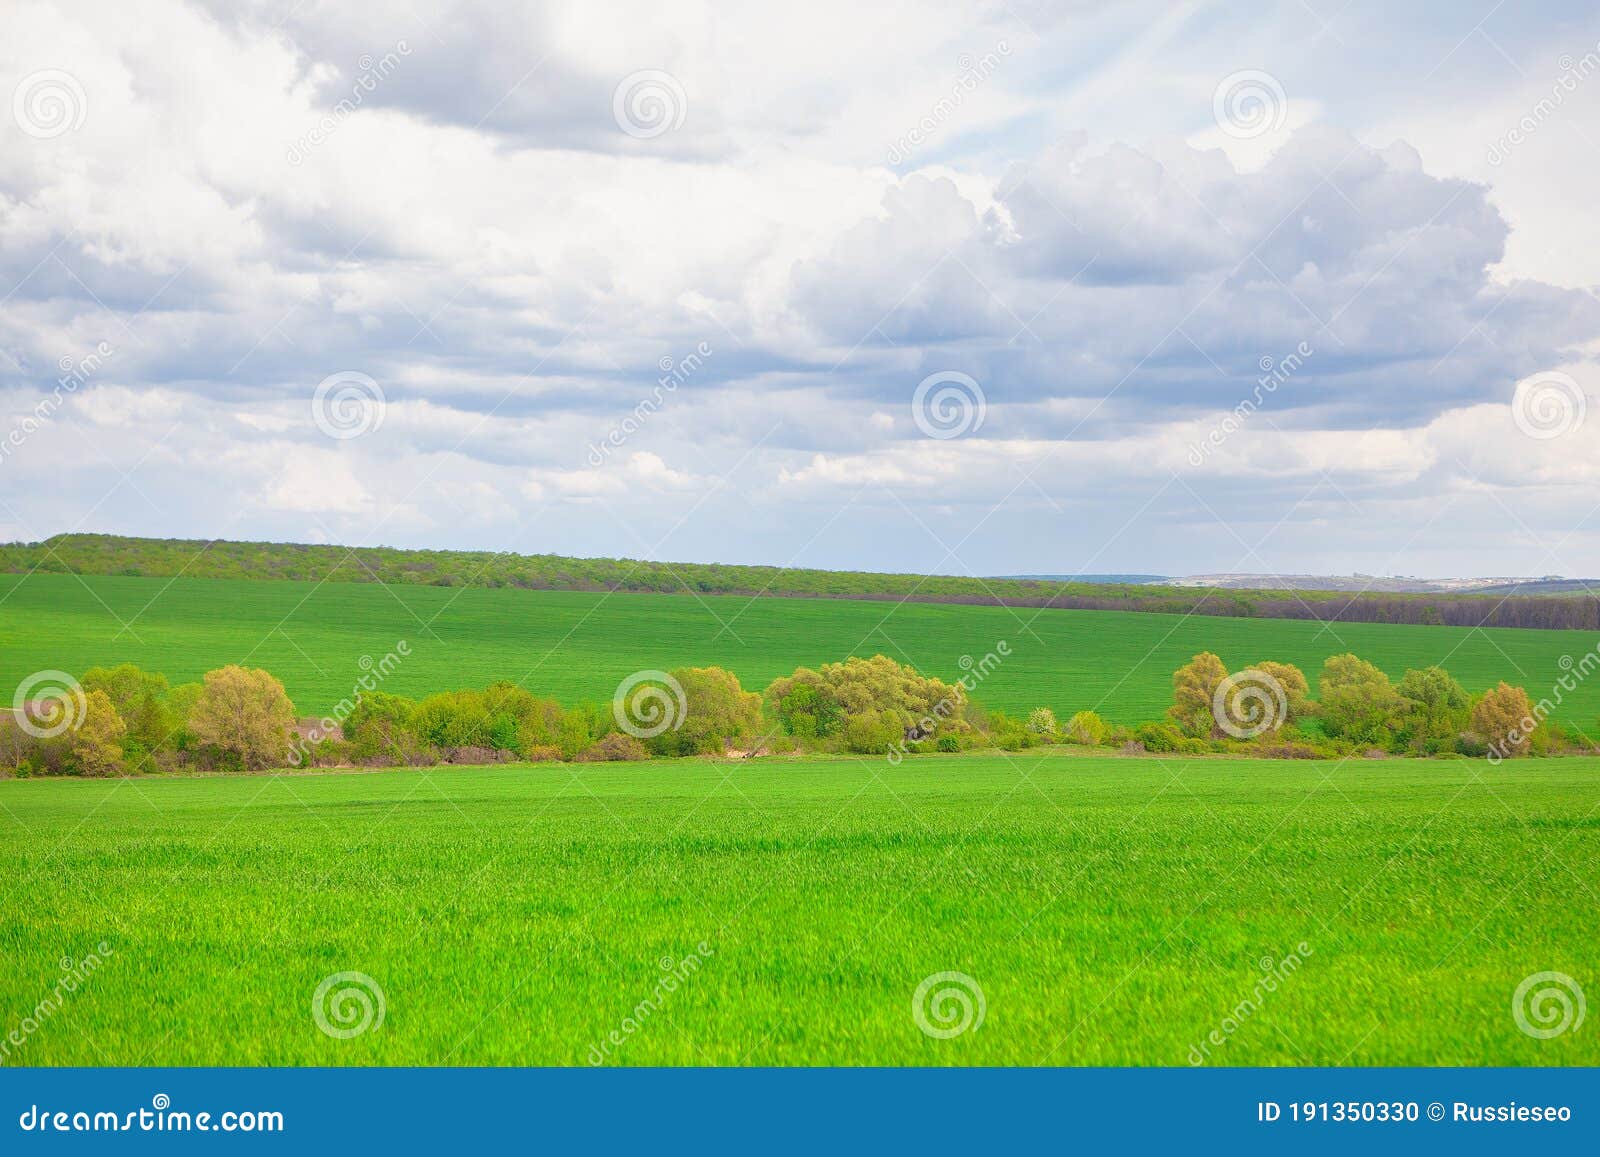 Low Clouds Over The Green Meadow Stock Photo Image Of Landscape